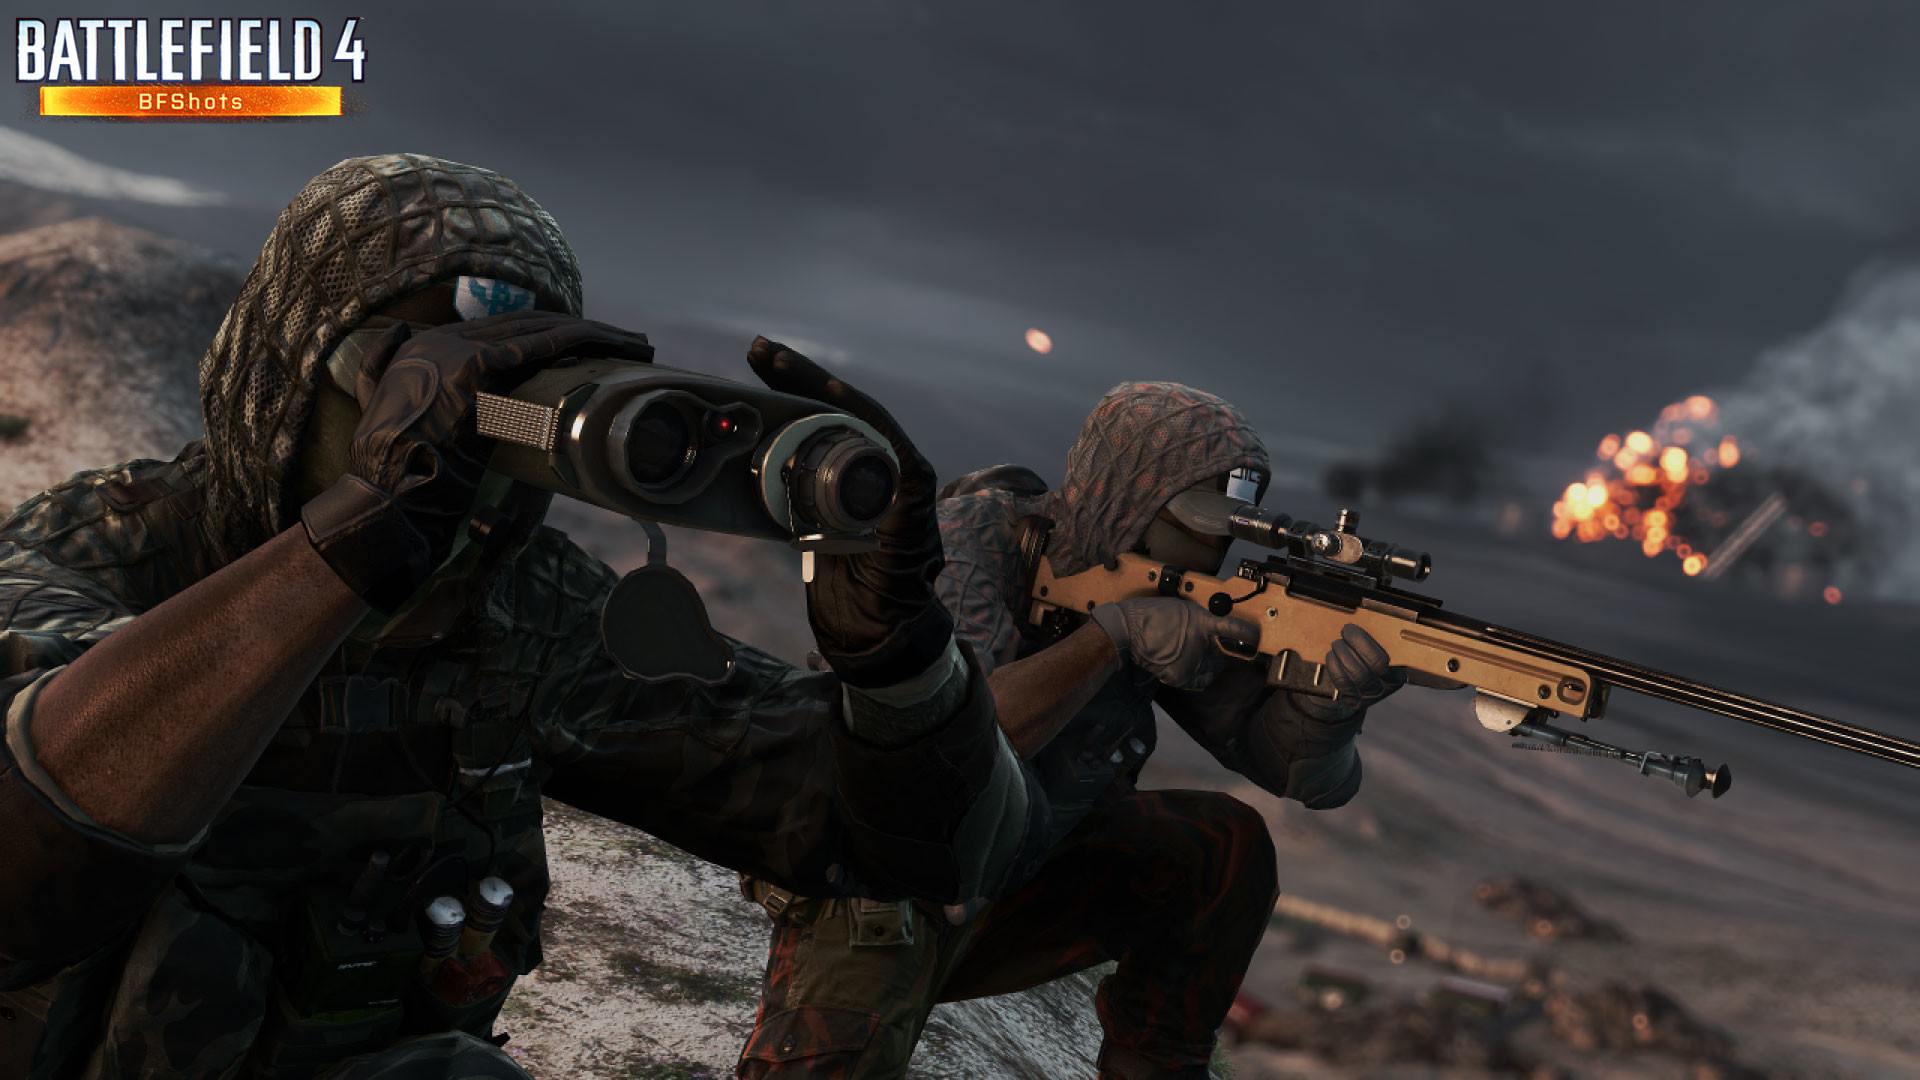 1920x1080 Battlefield 4, Recon Soldiers sniping from the mountain  wallpaper